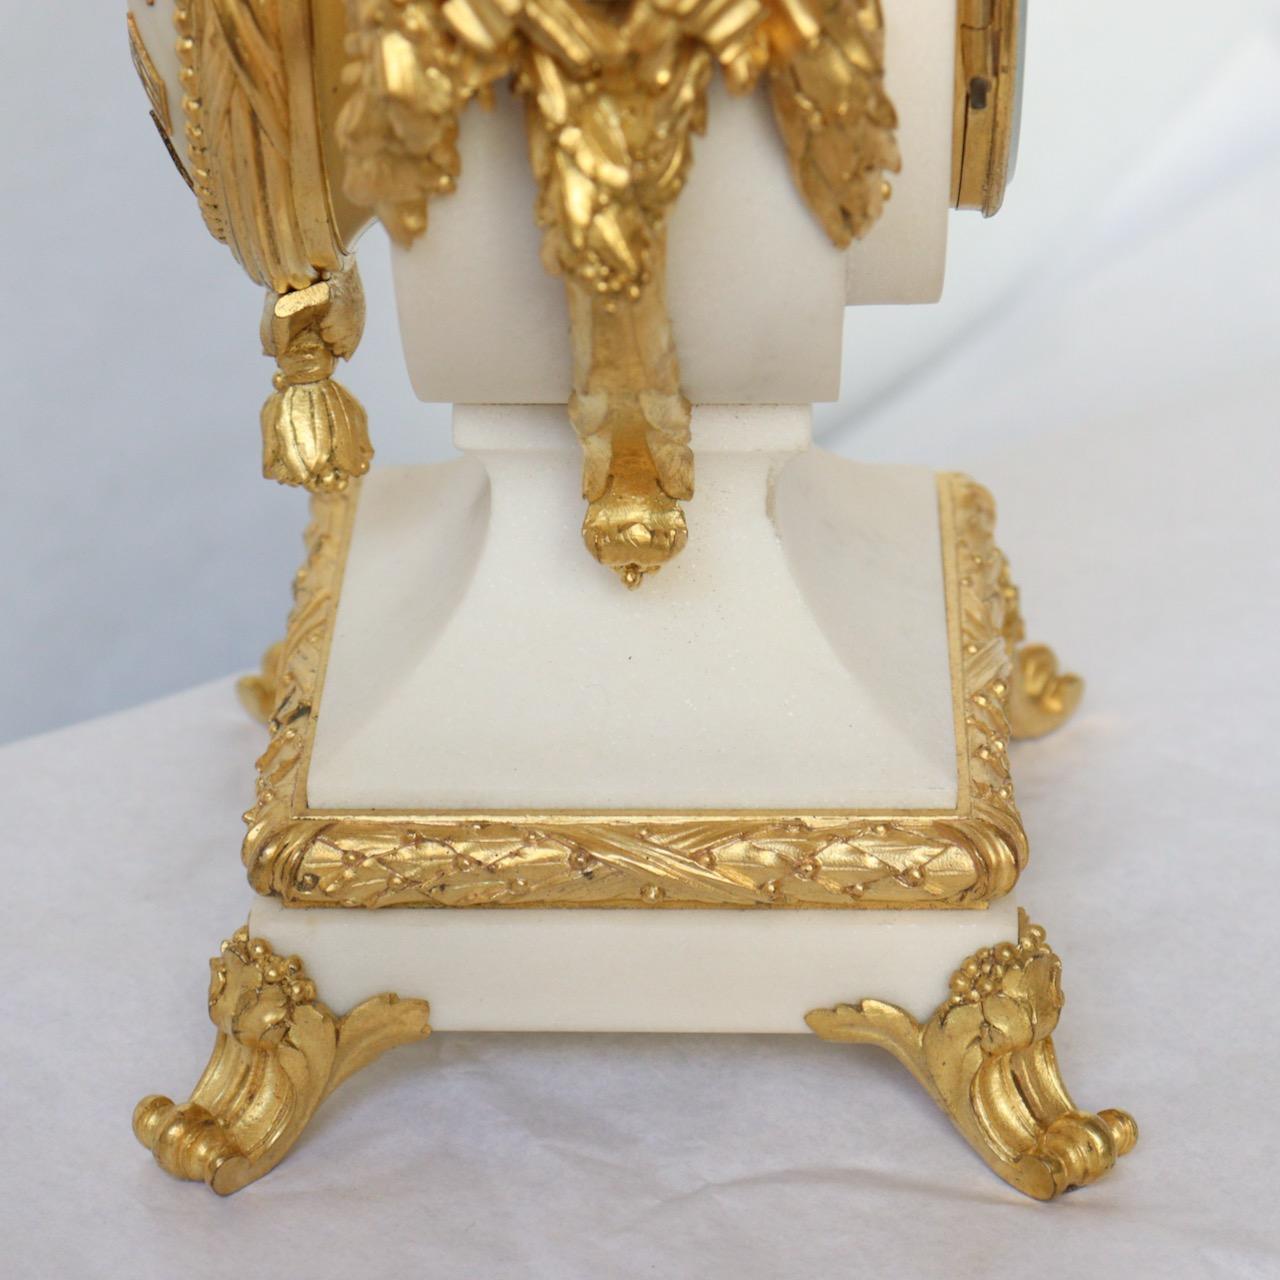 A French 1870 Louis XVI Style Ormolu and Marble Mantel Clock  7